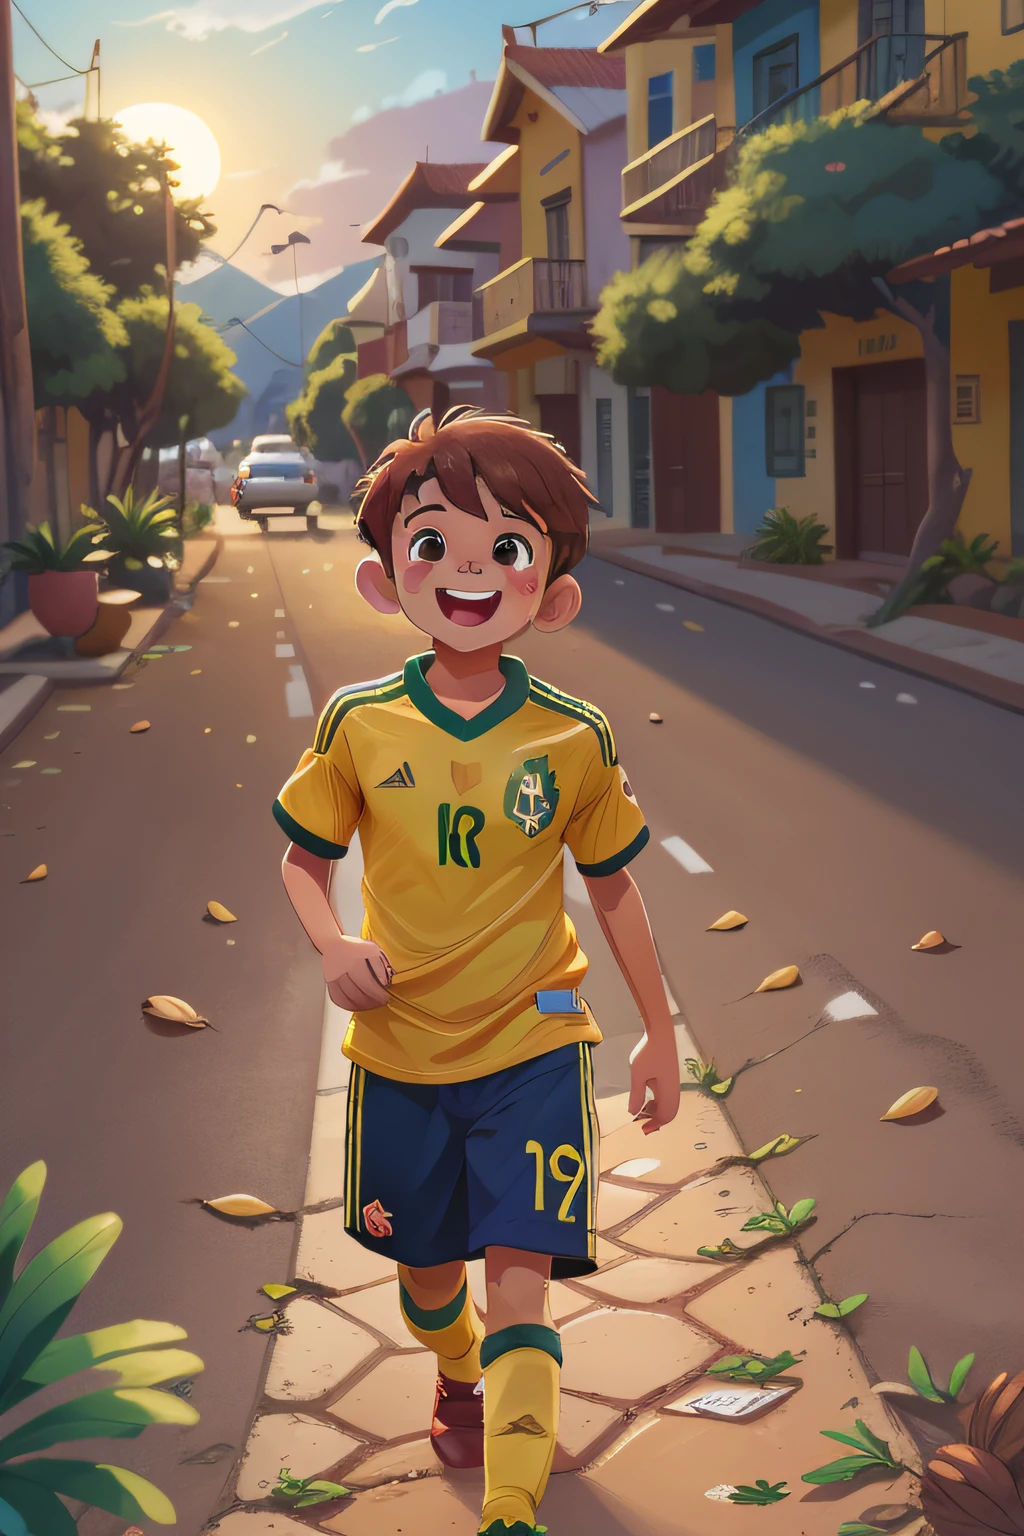 9 year old boy, short-hair, cut, chestnuts, olhos chestnuts, Shirt of the Brazilian national soccer team, Yellow, walking alone in a beautiful mountainous landscape at sunset, glad, disney chanel style, uhd image, 8K, ultra.